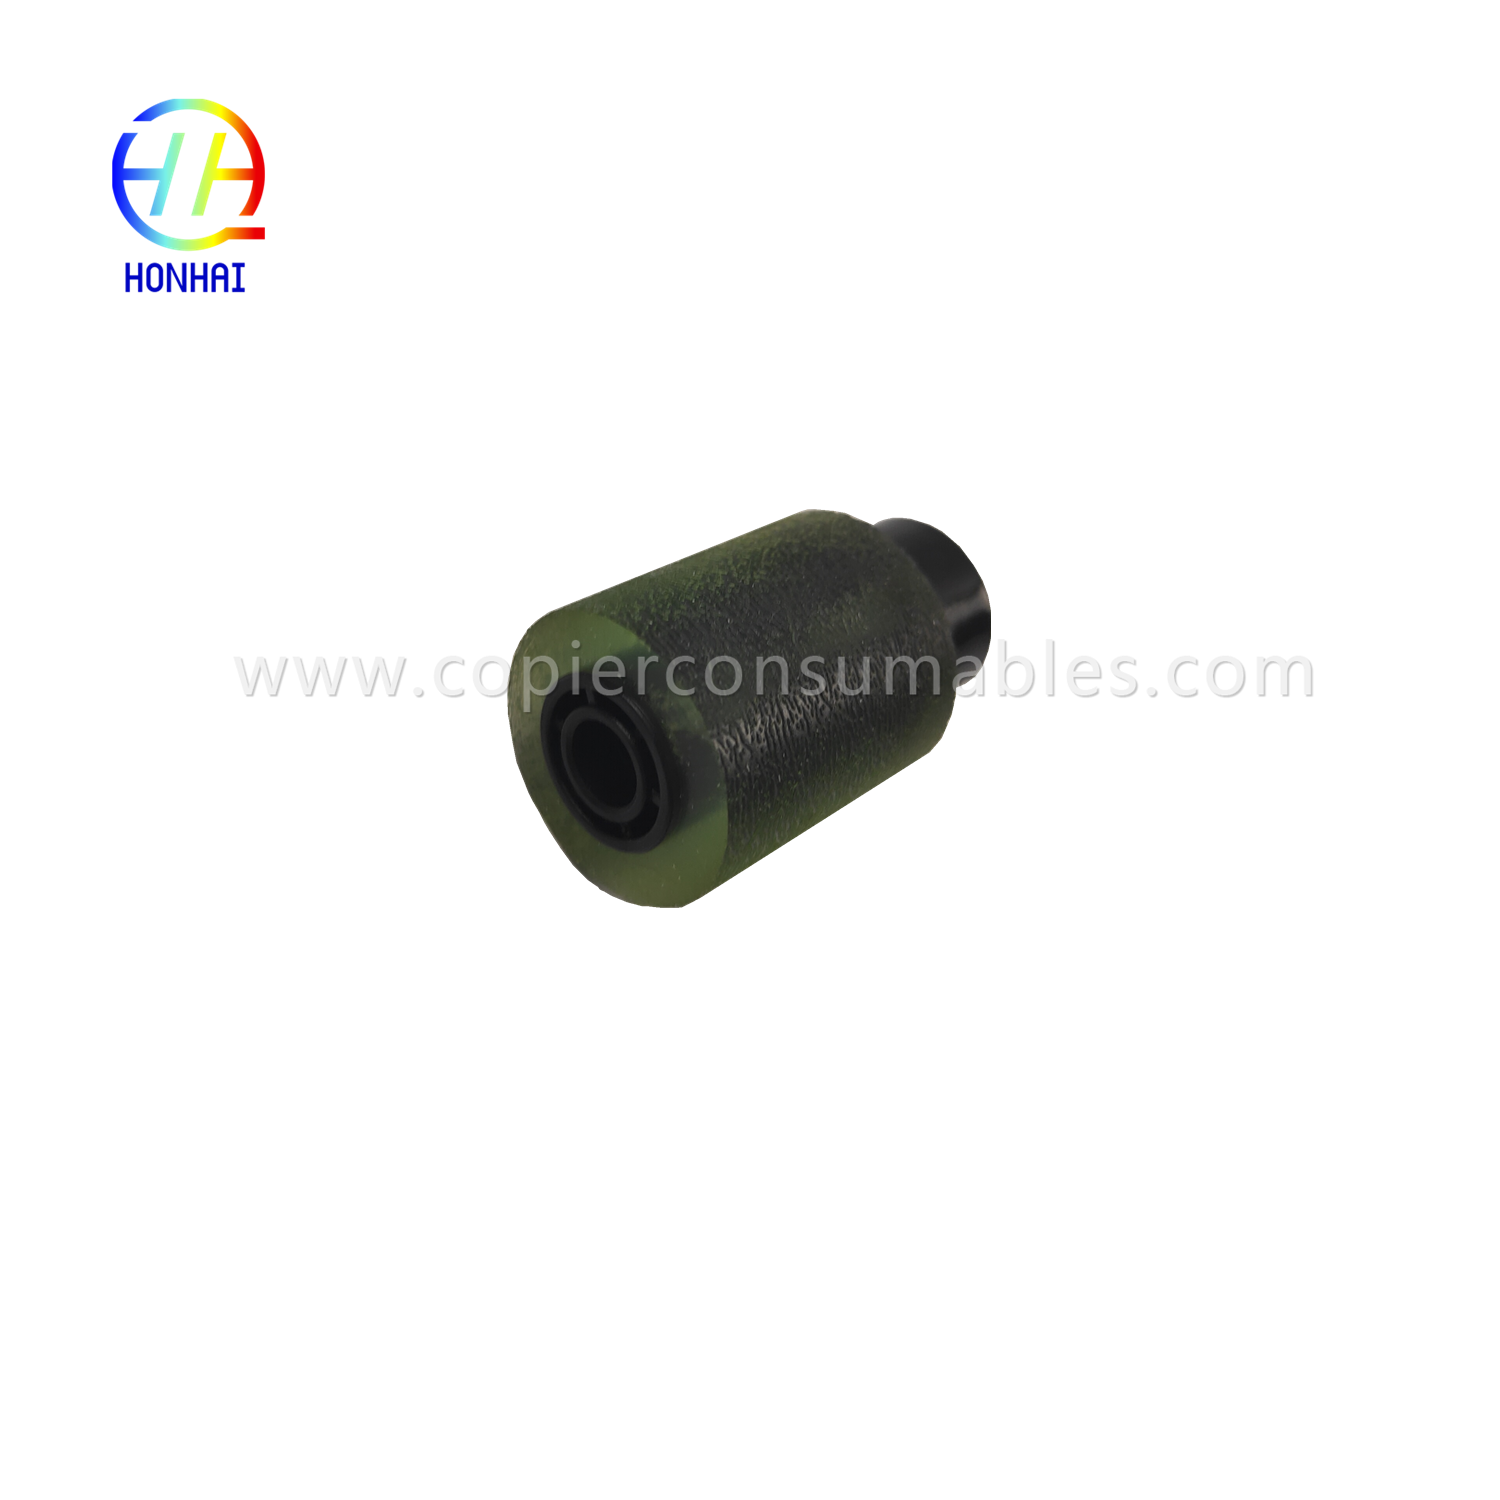 https://c585.goodao.net/feed-roller-for-ricoh-mpc2003-mpc2503-mpc3003-mpc3503-af031094-feed-separation